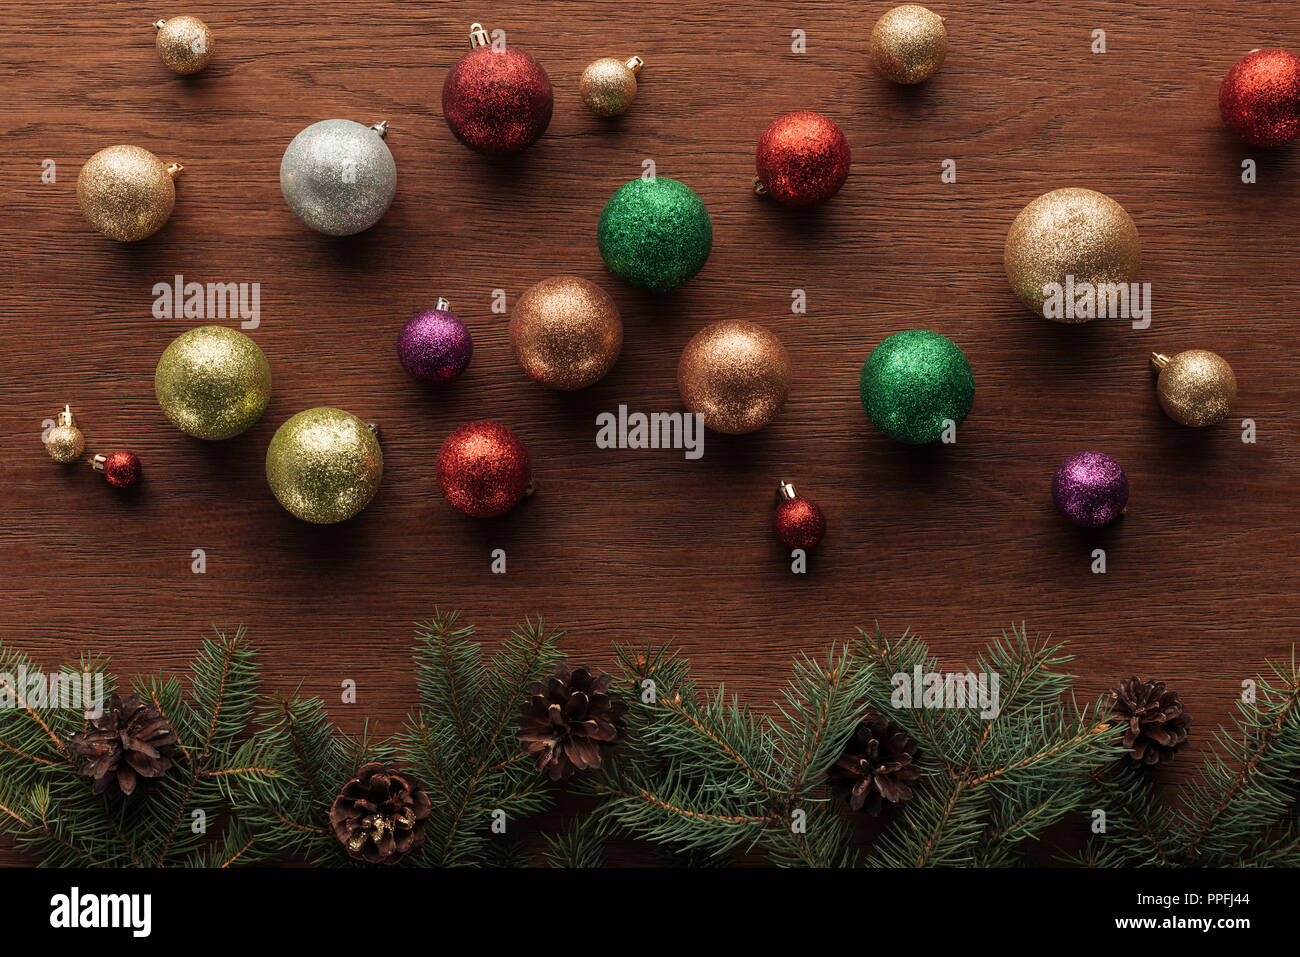 shiny colorful balls and coniferous twigs with pine cones on wooden background Stock Photo